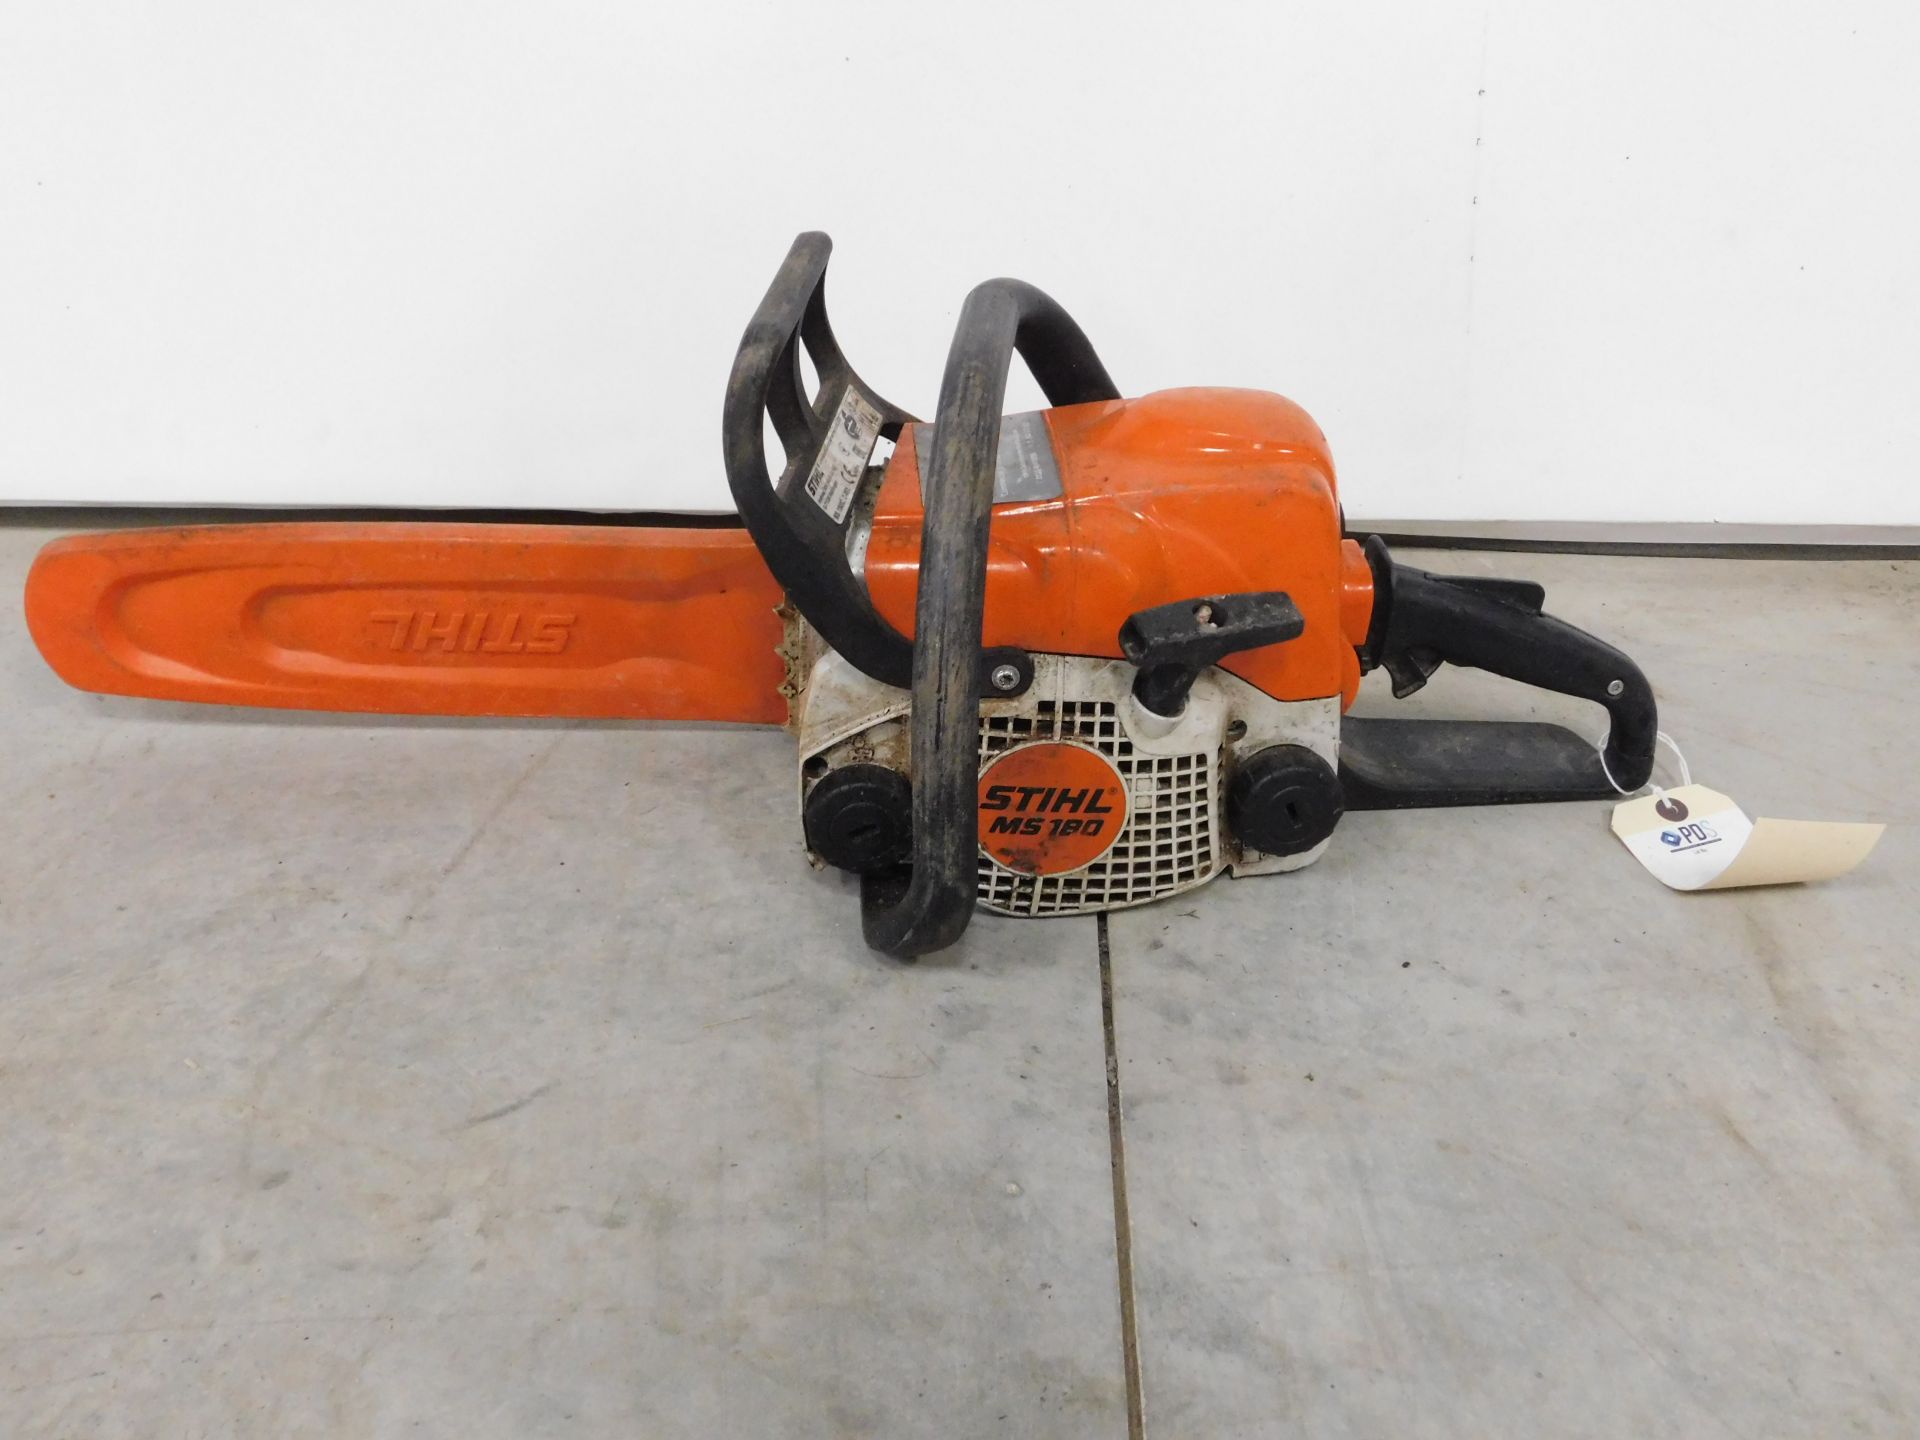 Stihl MS 180 Petrol Chainsaw (Location Brentwood. Please Refer to General Notes)